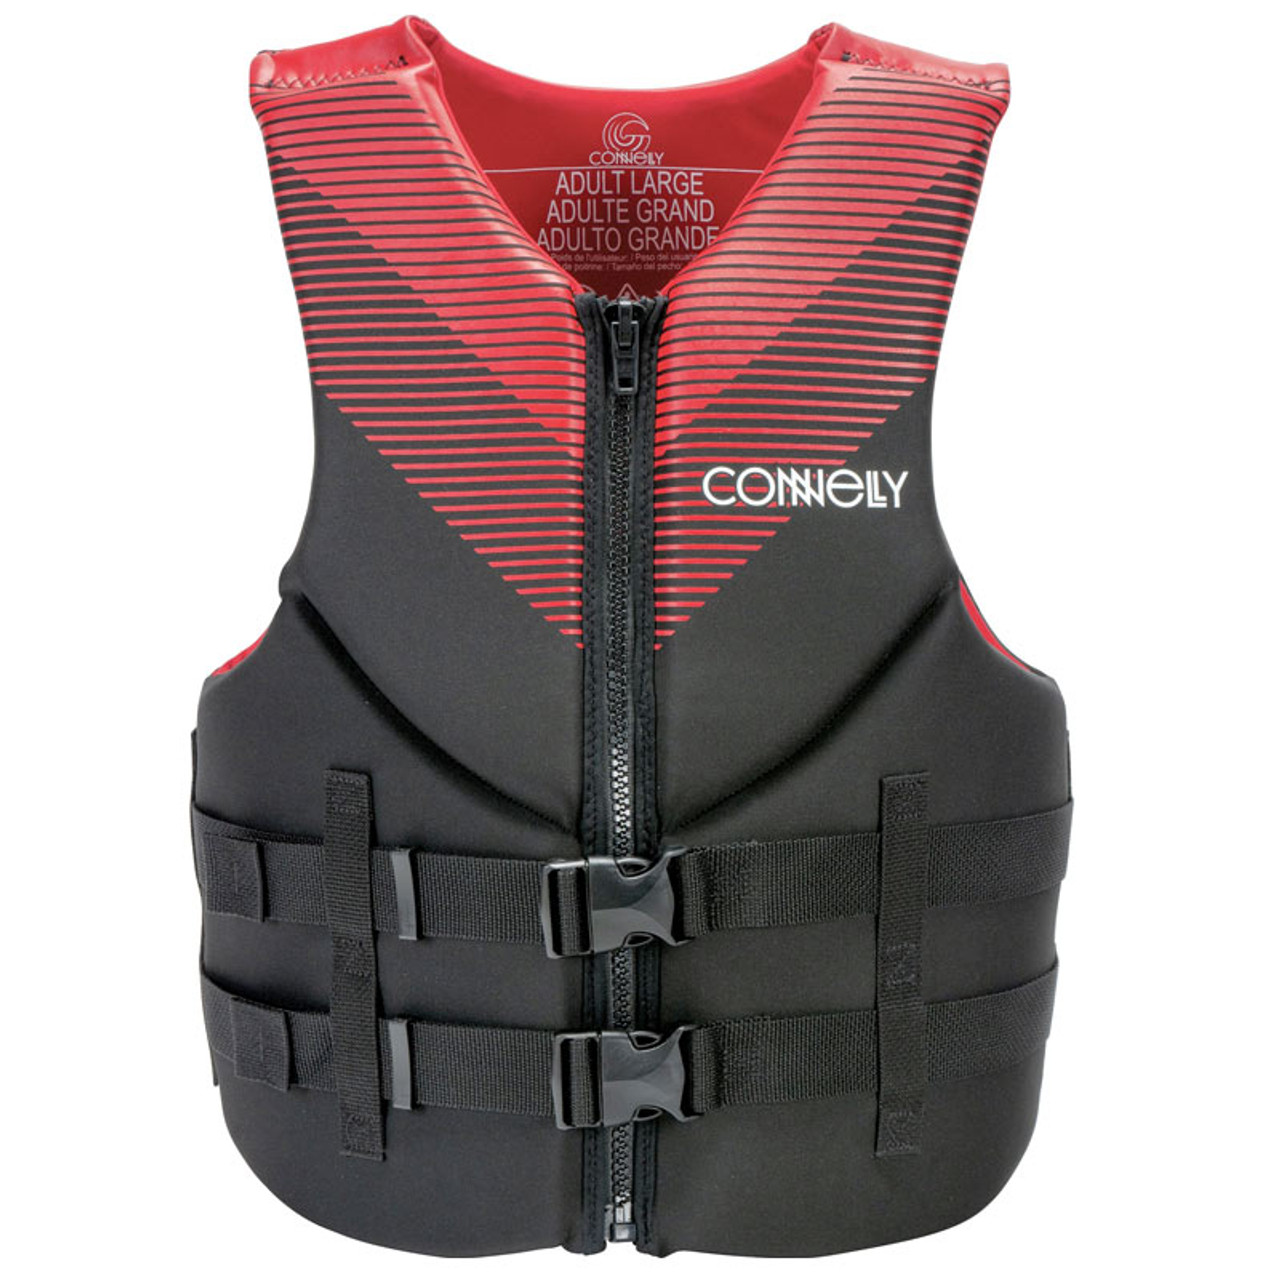 Connelly Men's Promo Neoprene Life Jacket Red